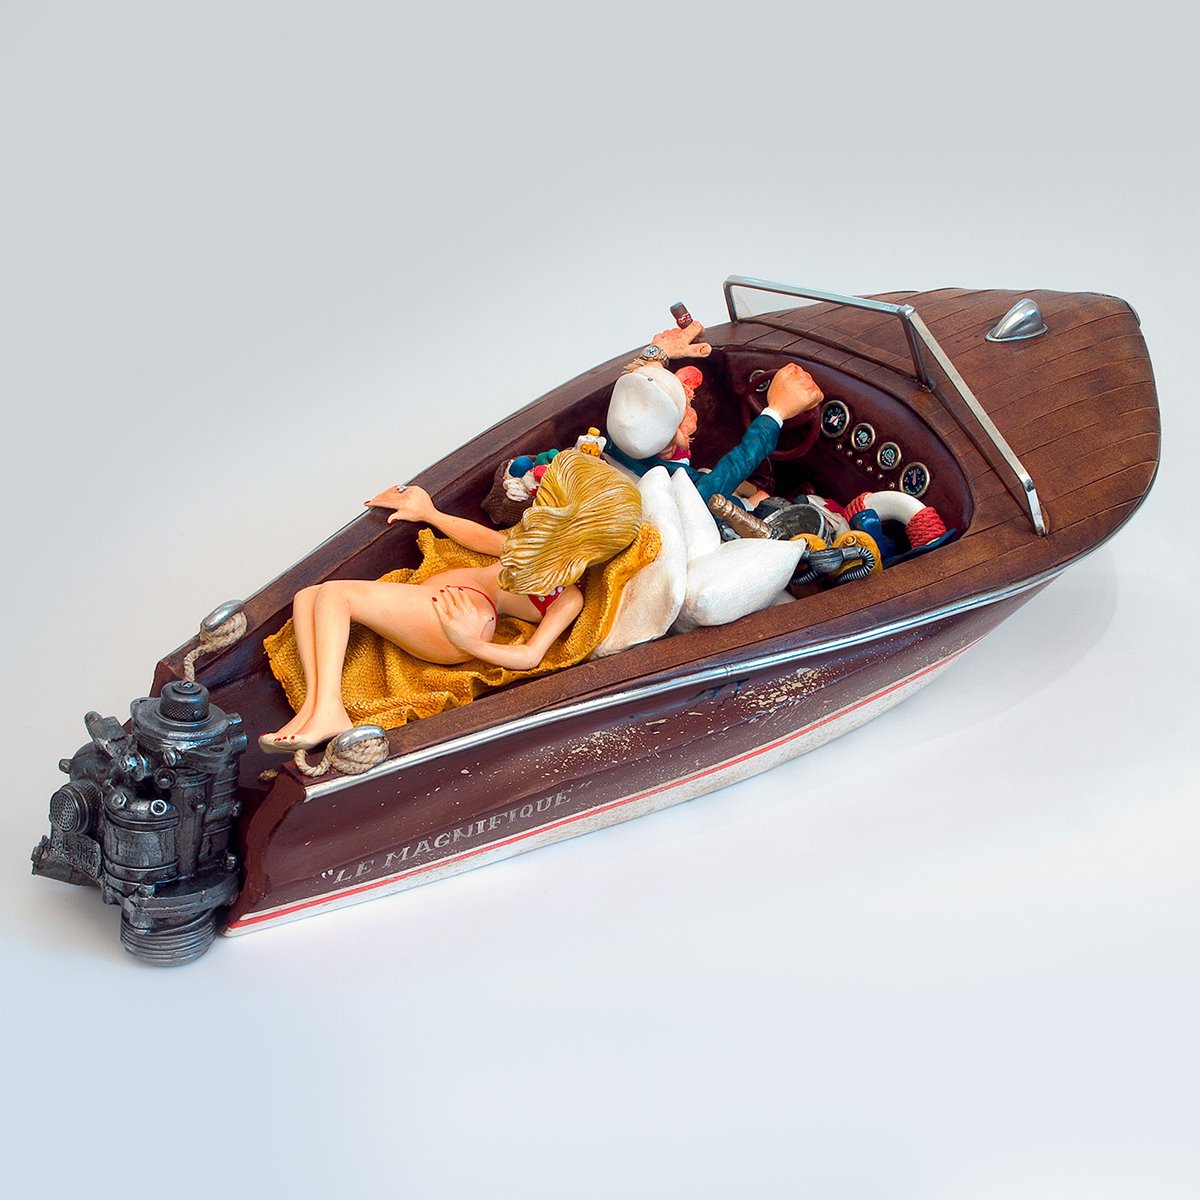 Le Playboy Speedboat - Designer Studio - Quirky objects